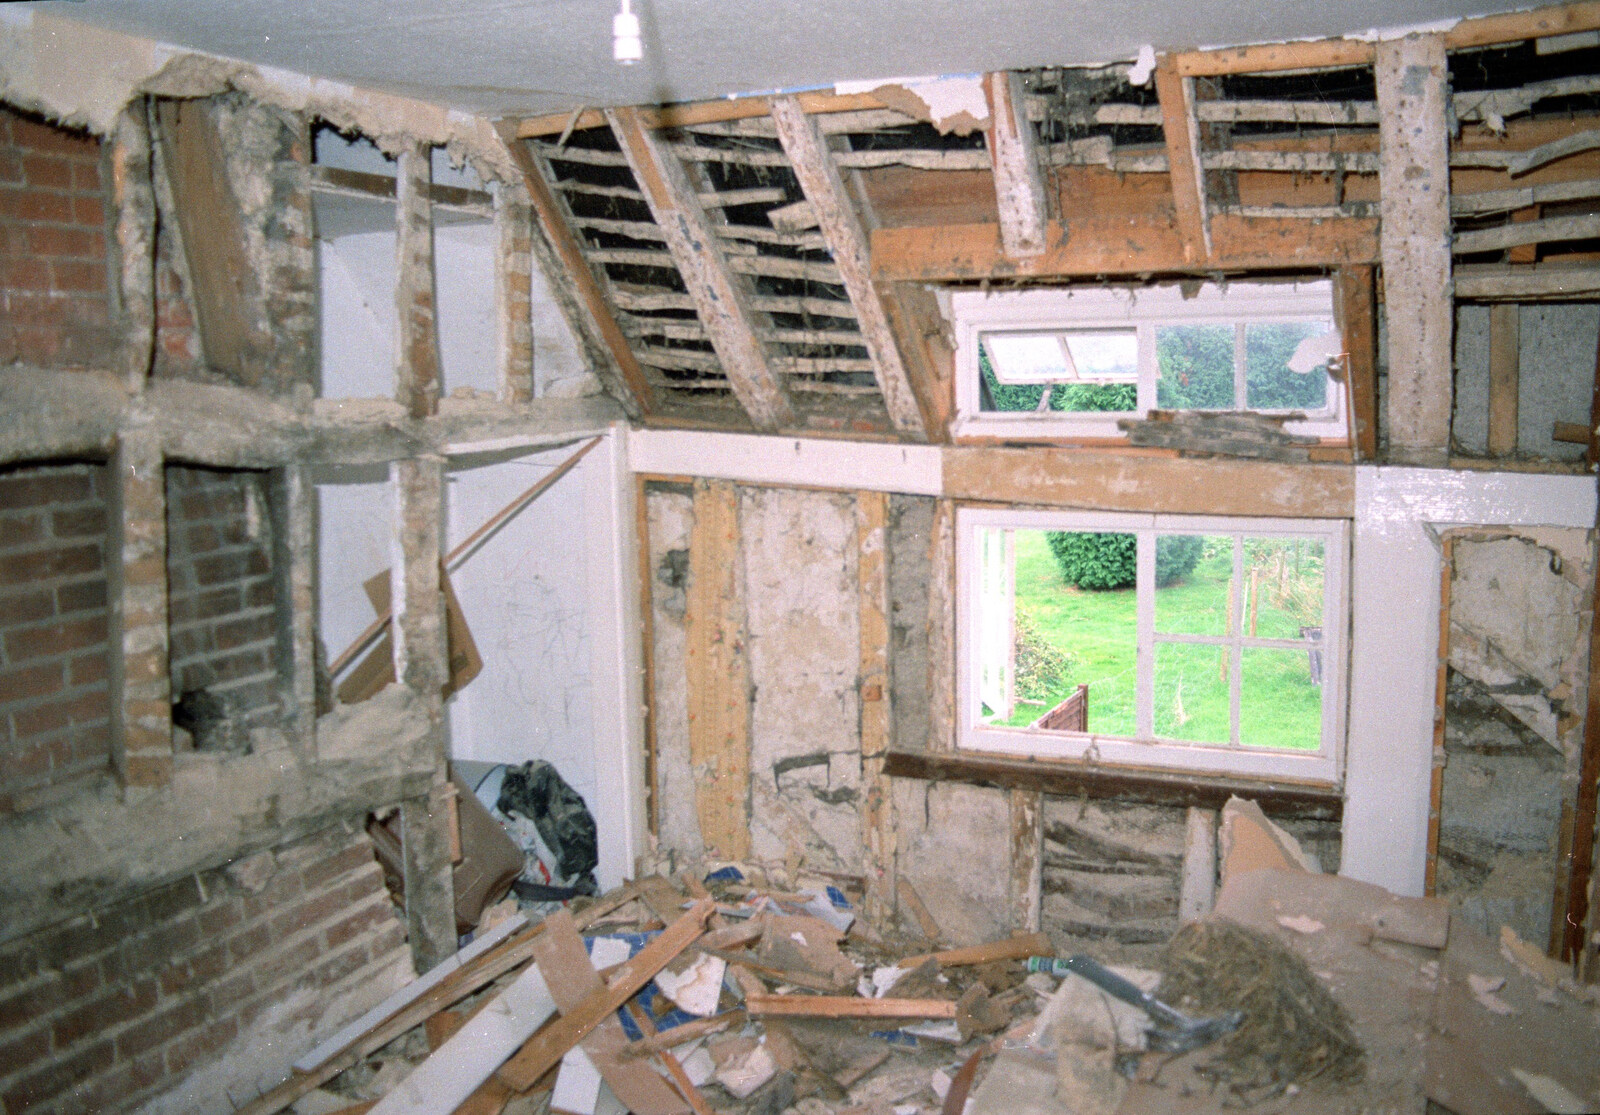 The bedroom is wrecked from Bedroom Demolition, Brome, Suffolk - 10th October 1994